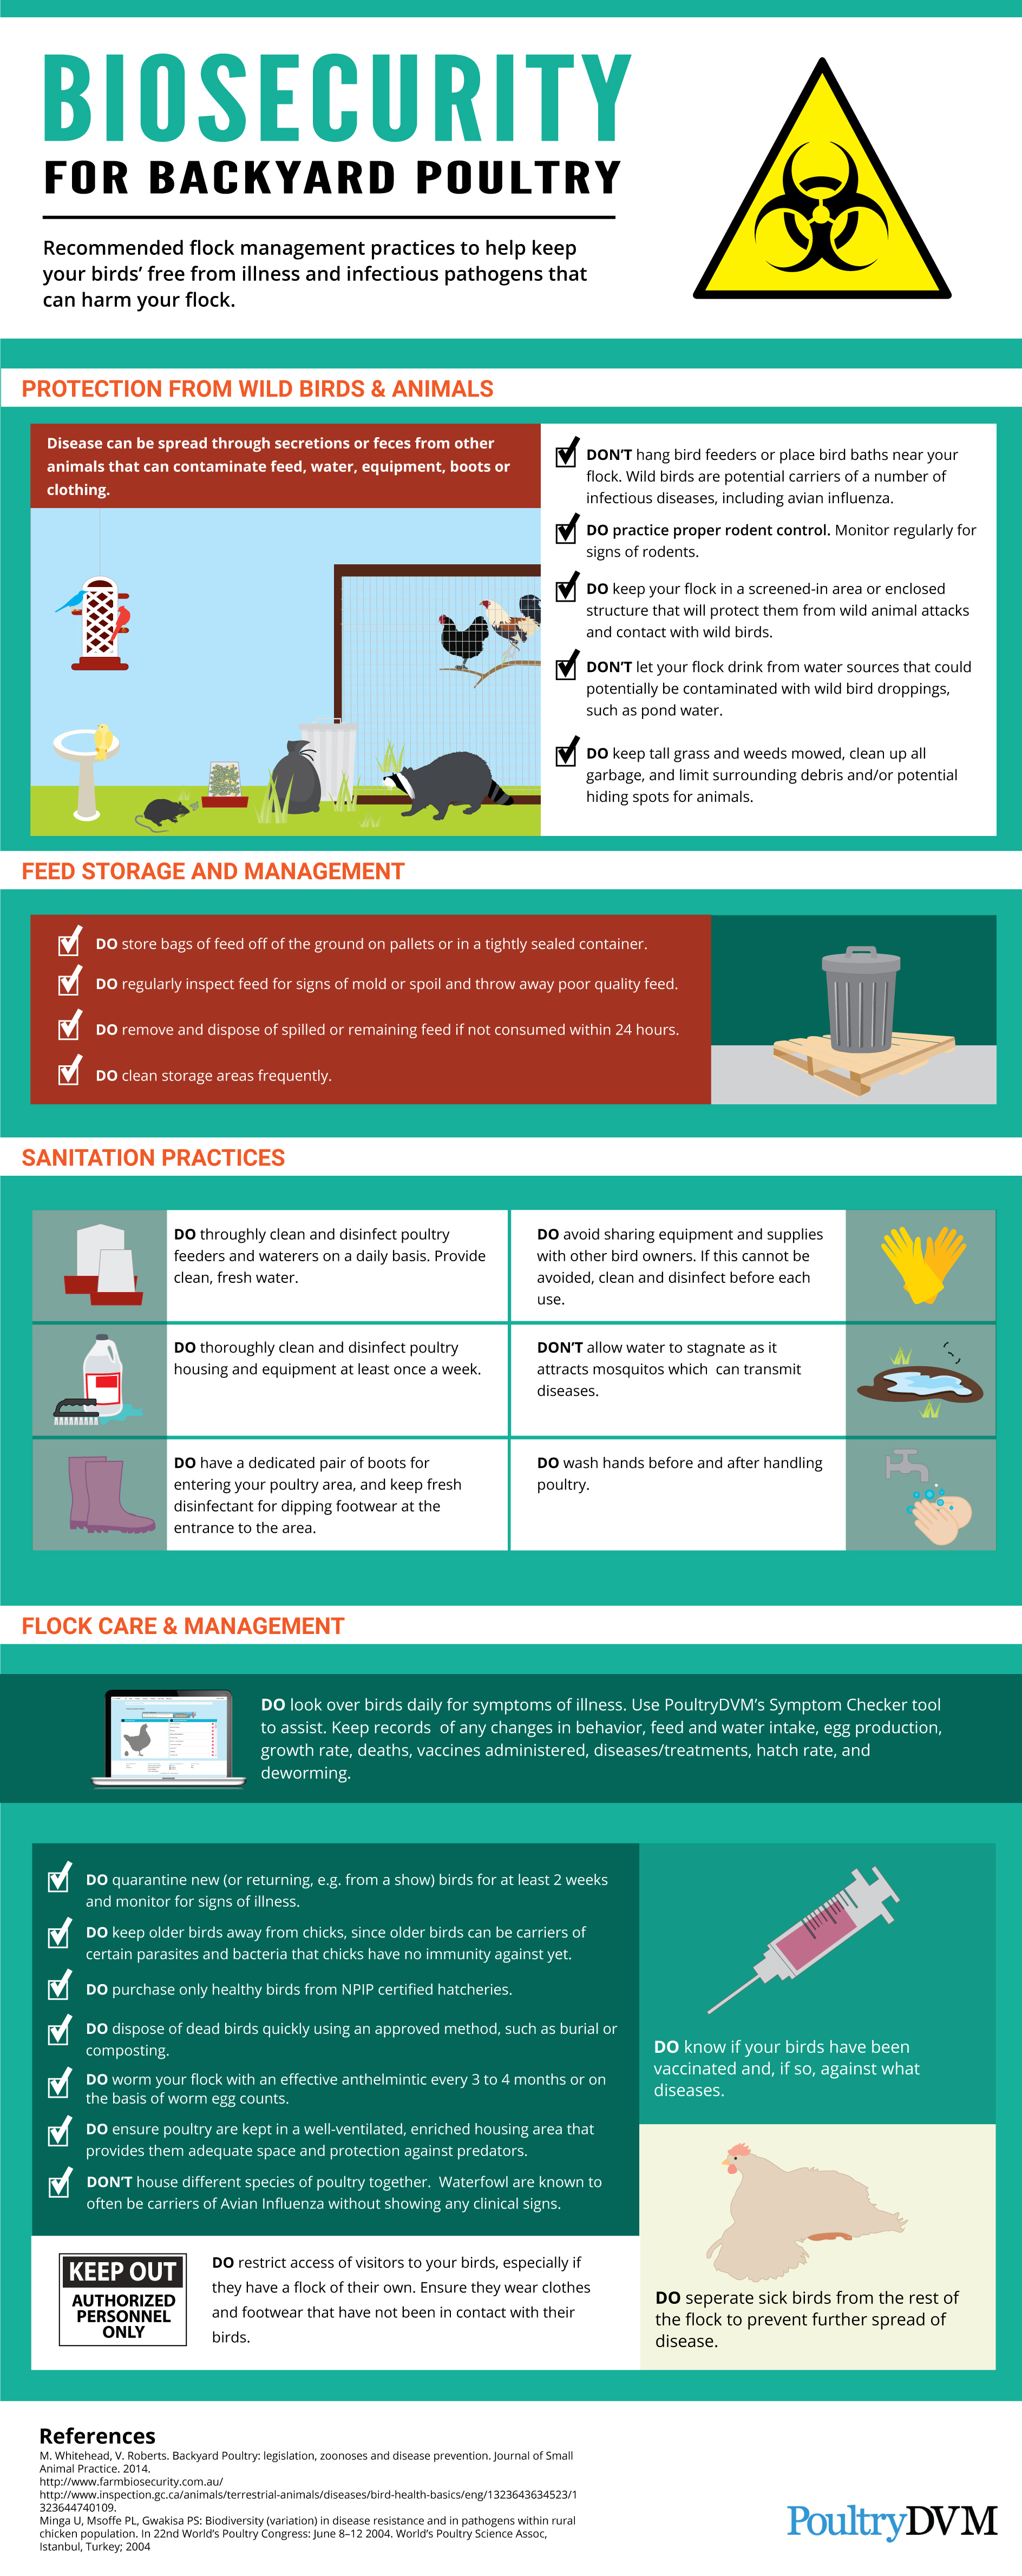 PoultryDVM - Biosecurity Tips for Backyard Poultry Infographic